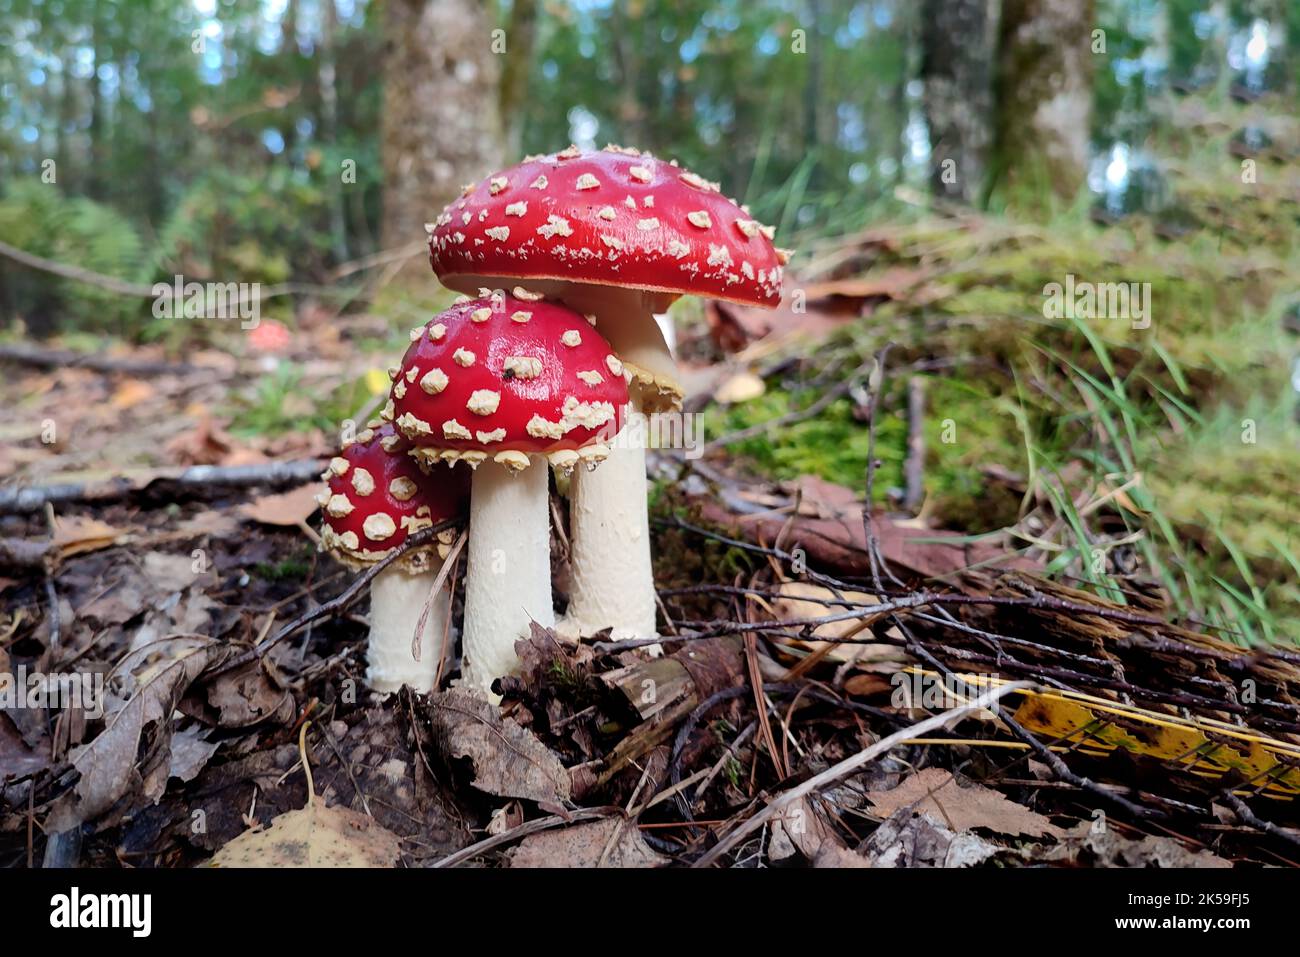 Red Amanita muscaria mushrooms in a forest Stock Photo